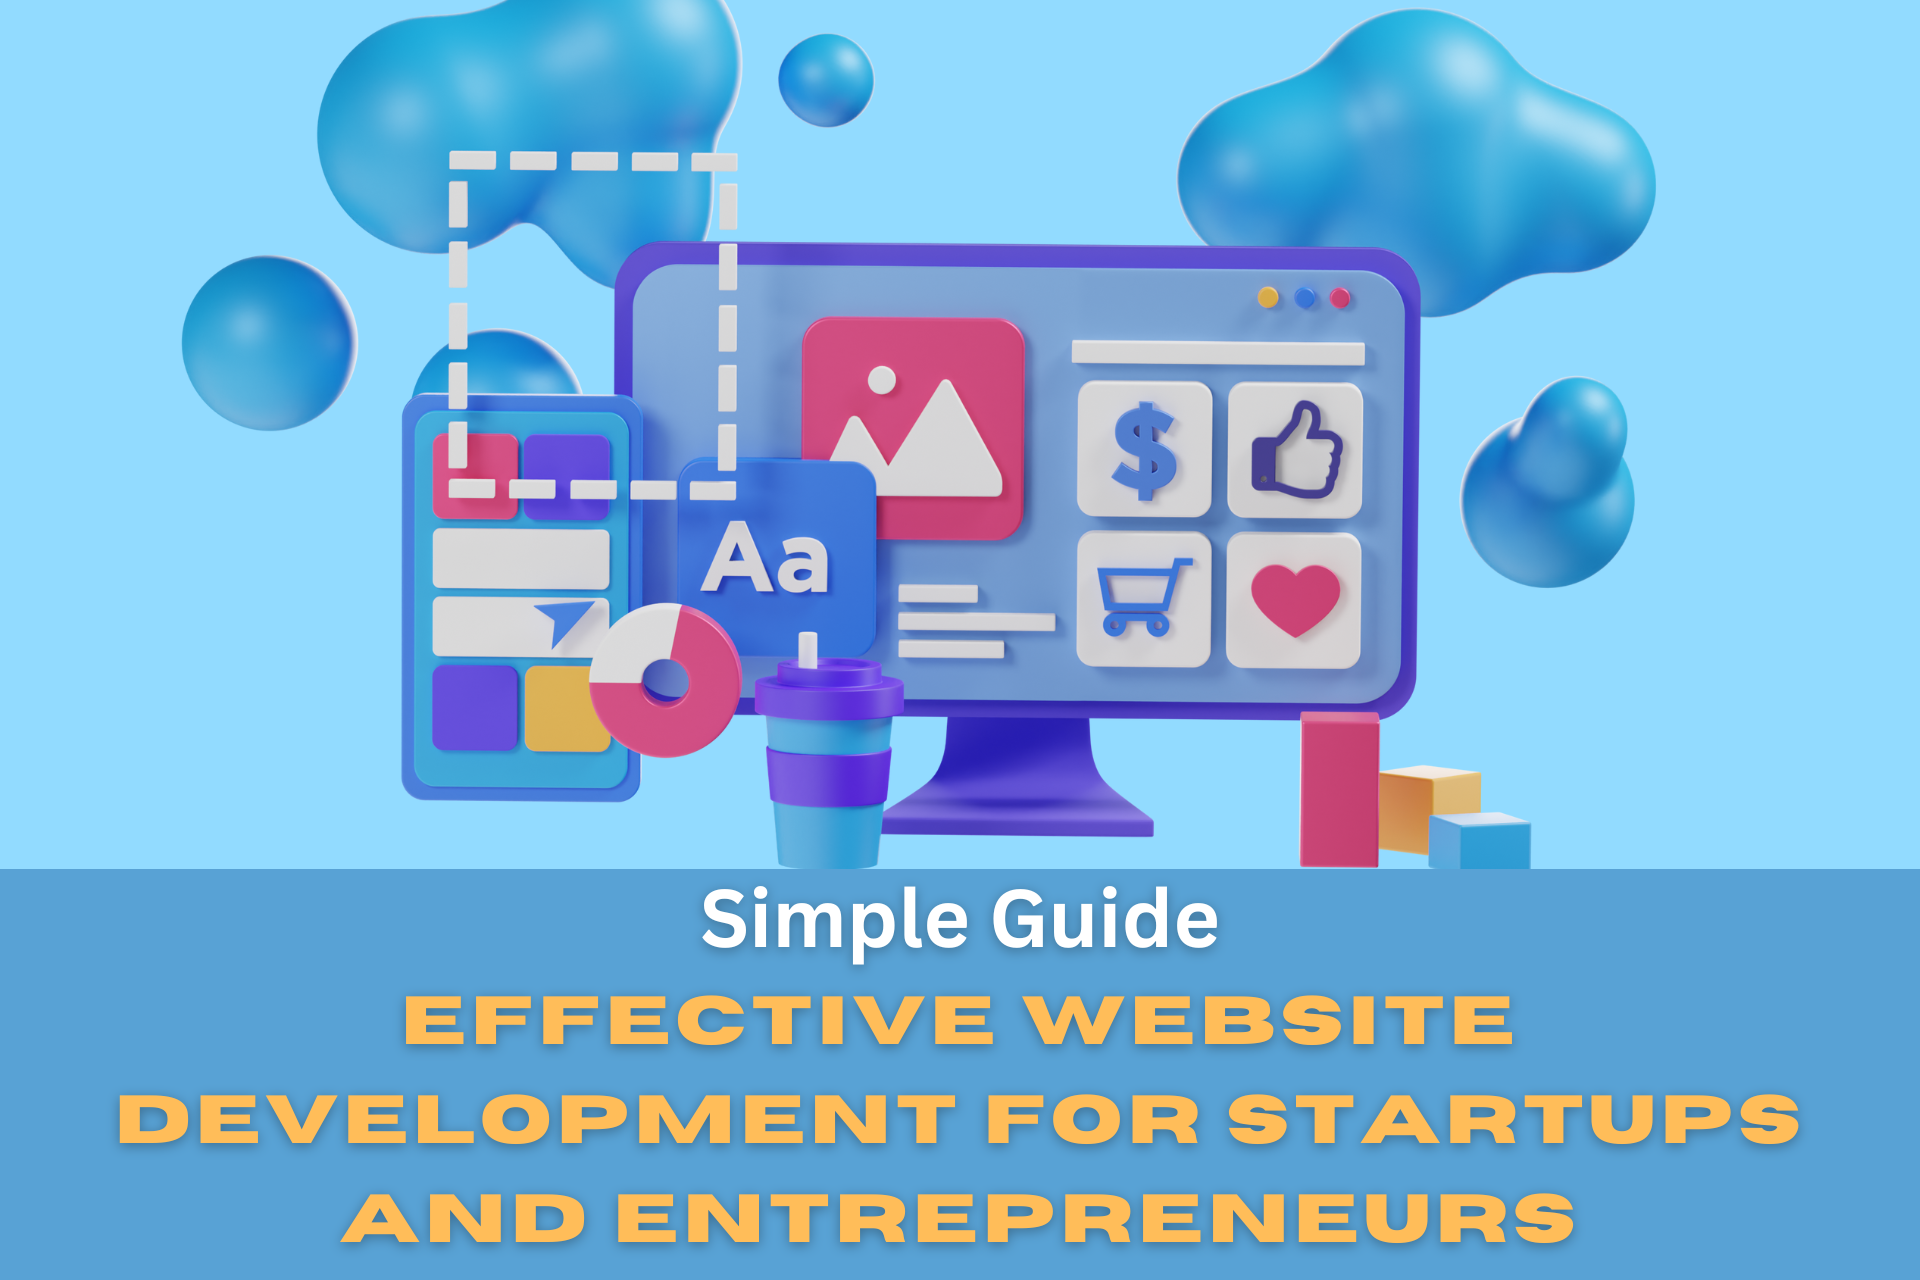 Simple Guide to Effective Website Development for Startups and Entrepreneurs